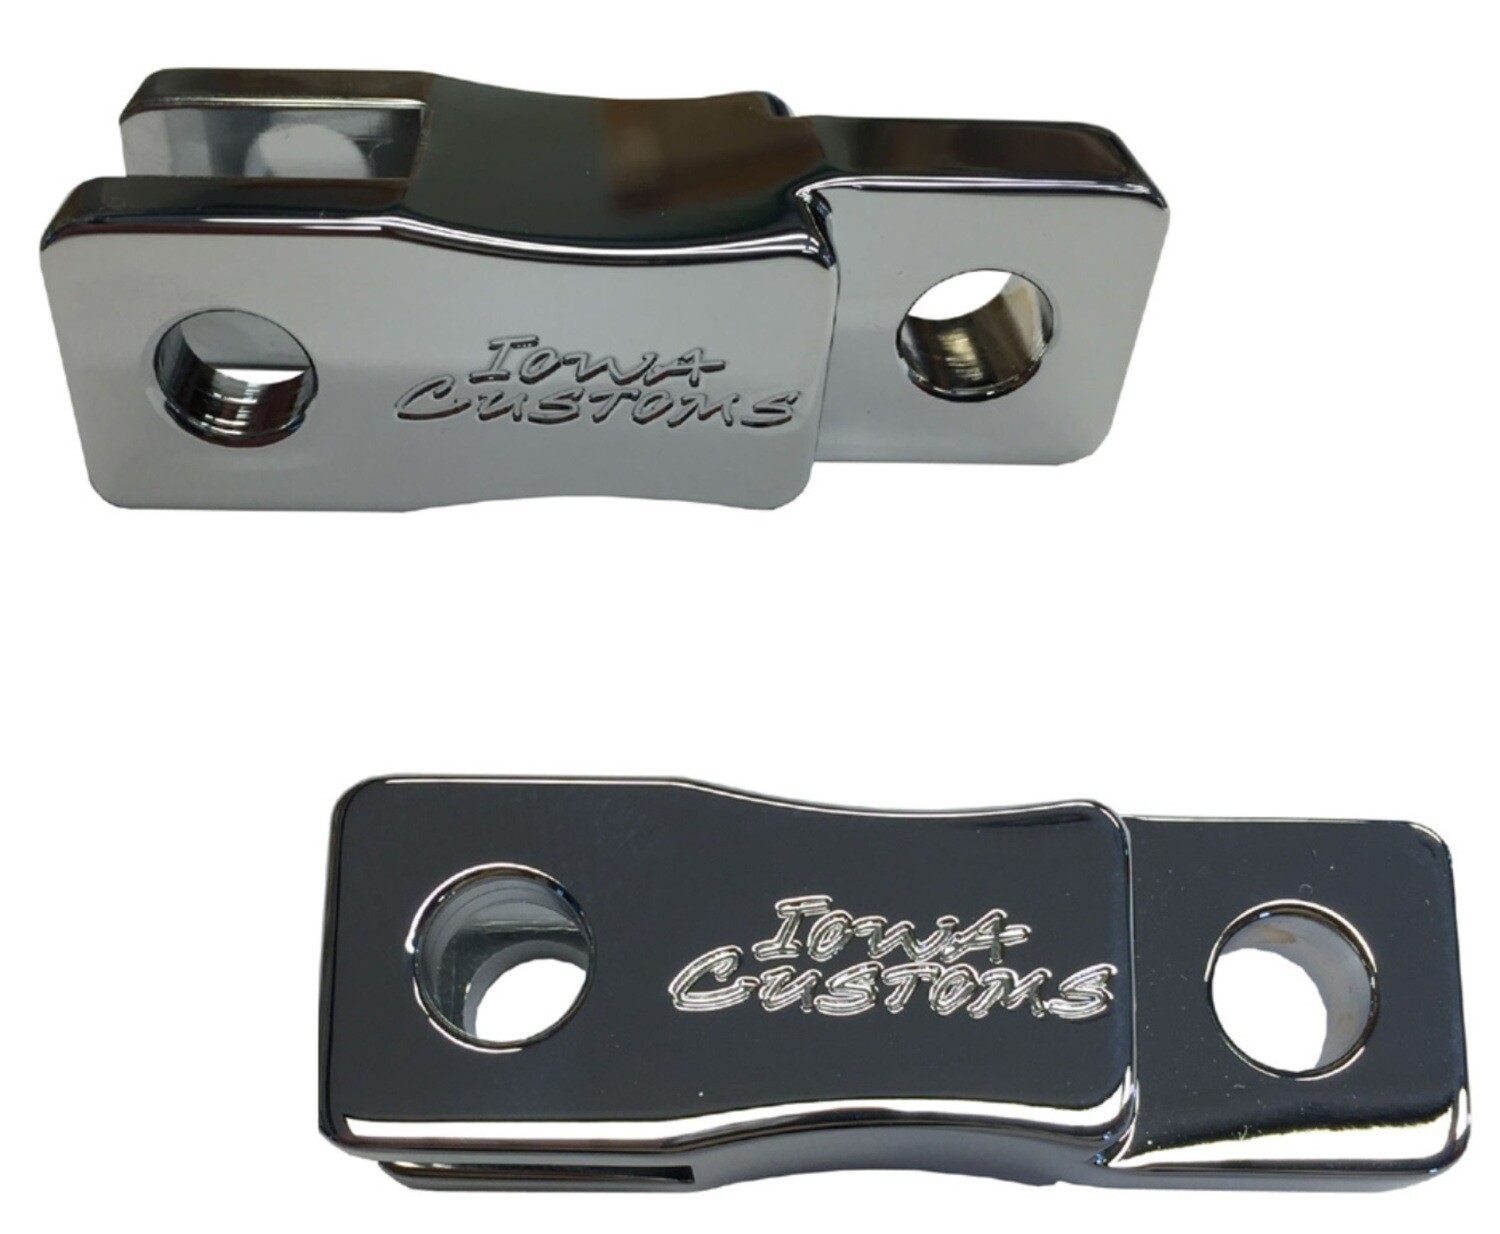 Iowa Customs 2" Clutch Pedal Extender - Chrome Country | Shop | Chrome  Country